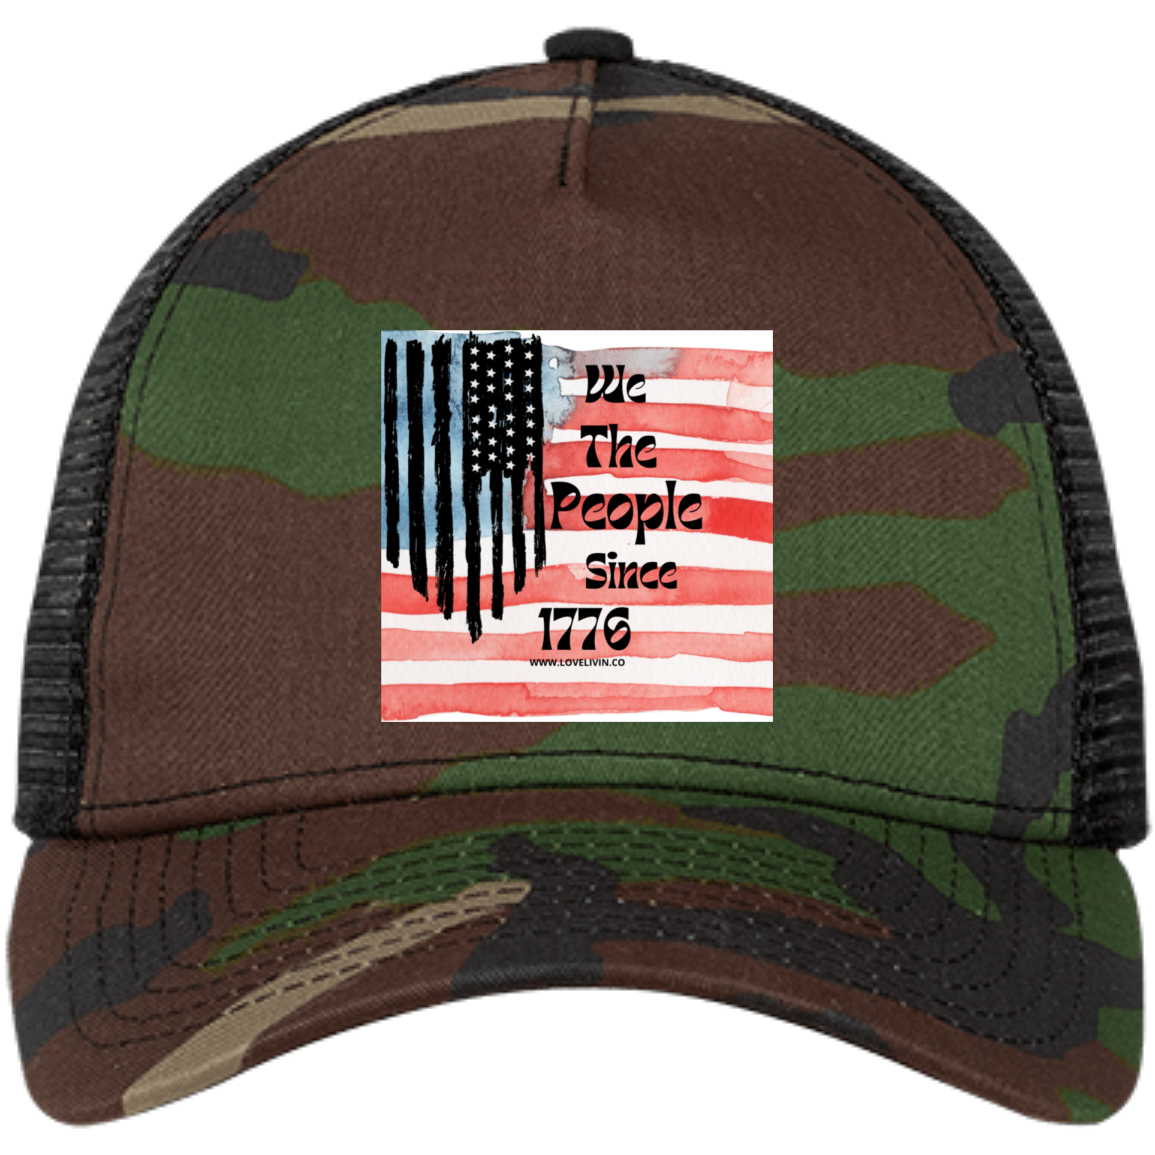 WE THE PEOPLE SINCE 1776-B Embroidered Snapback Trucker Cap